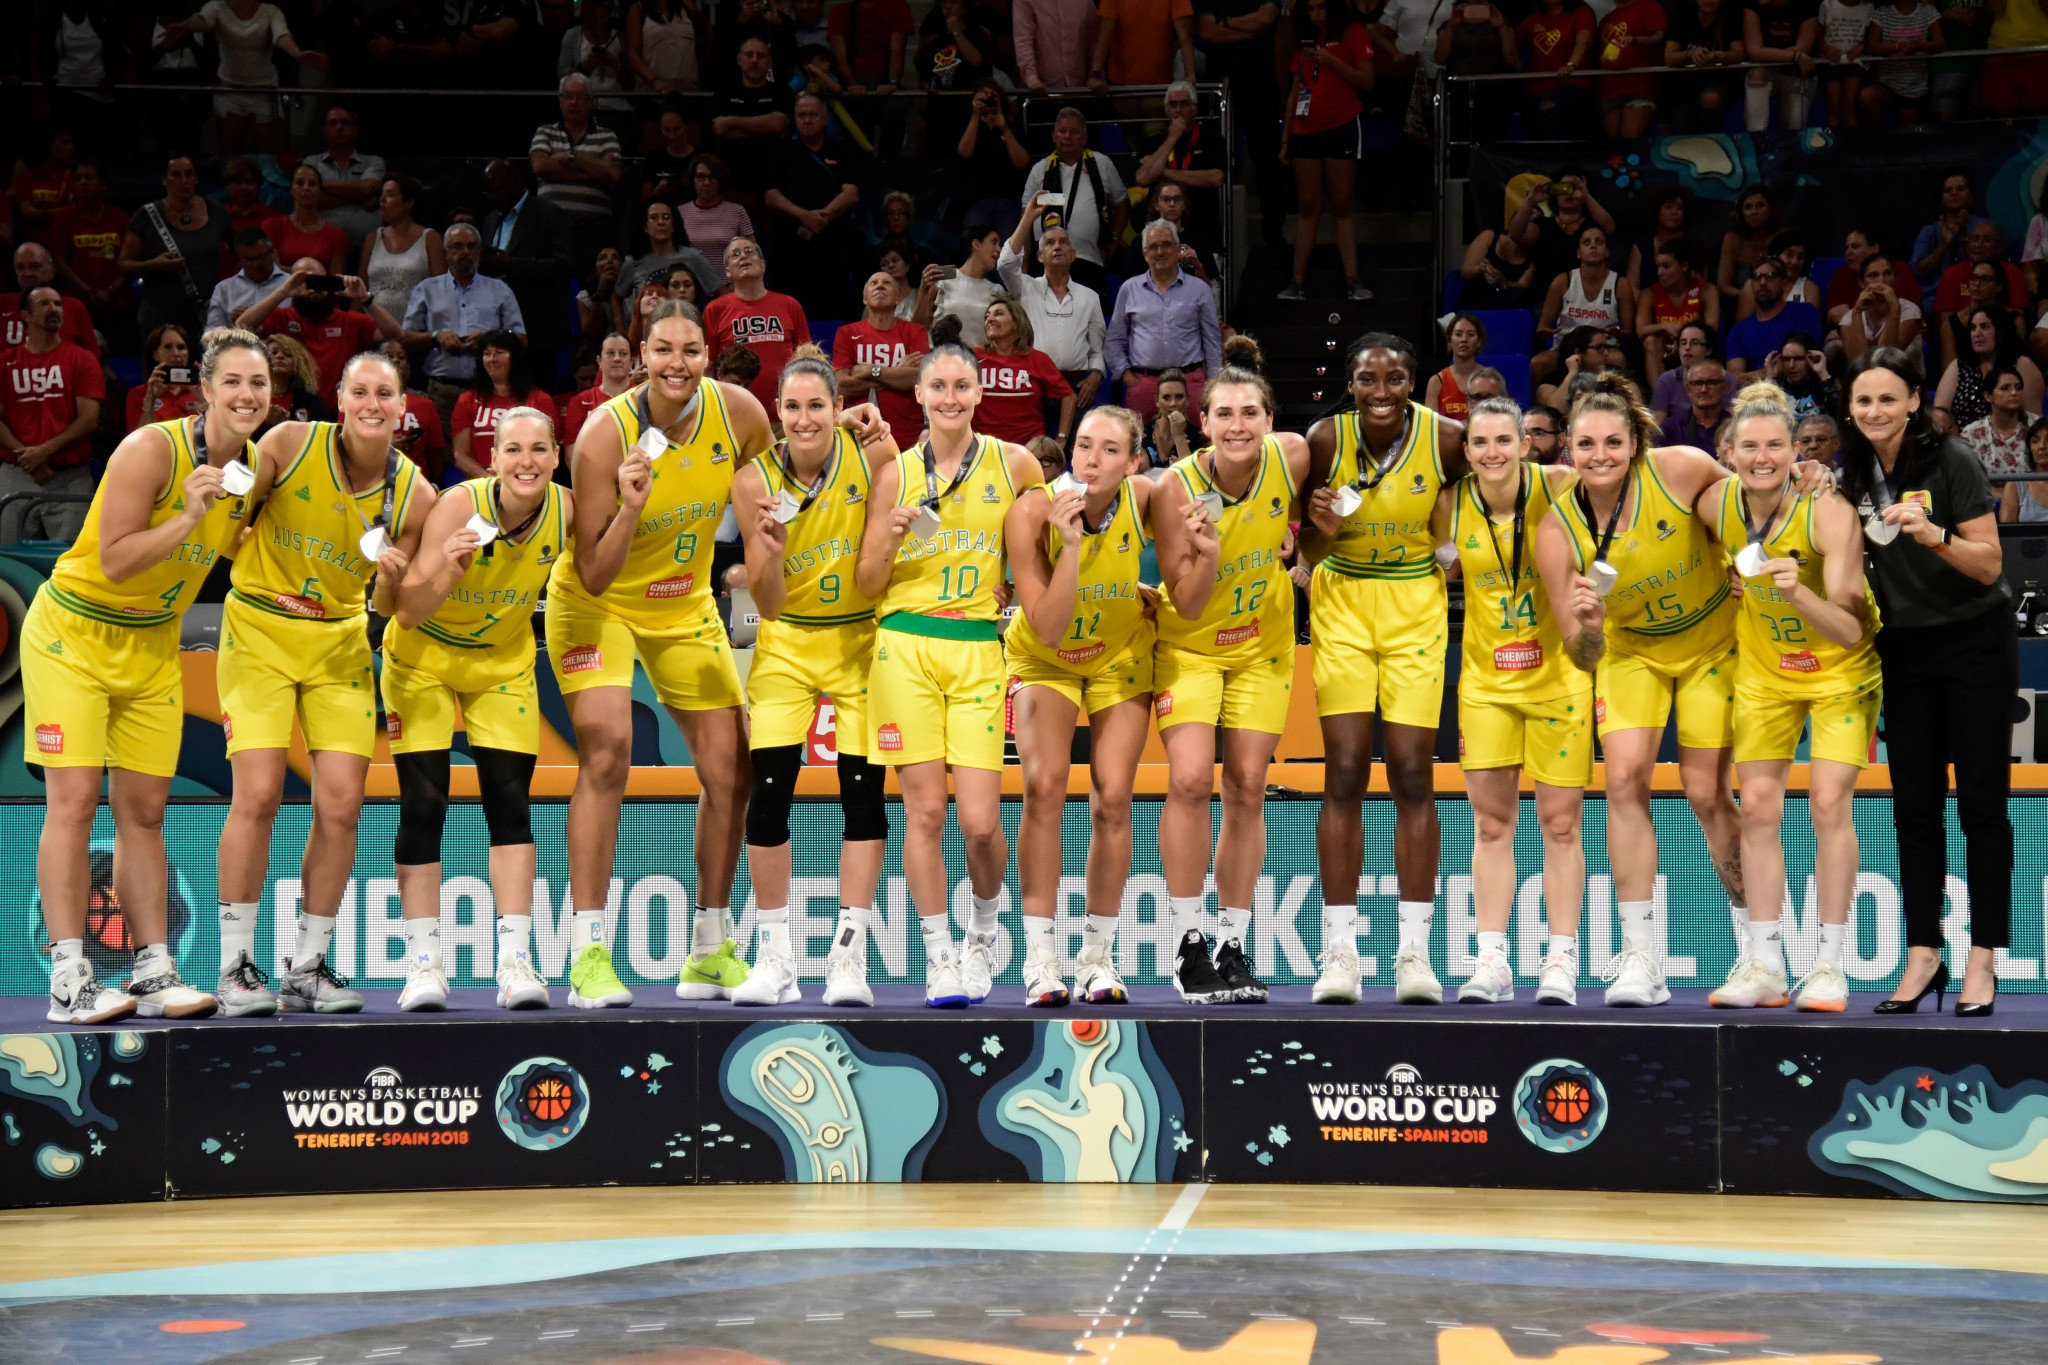 Organising Committee formed for 2022 Women's Basketball World Cup in Australia